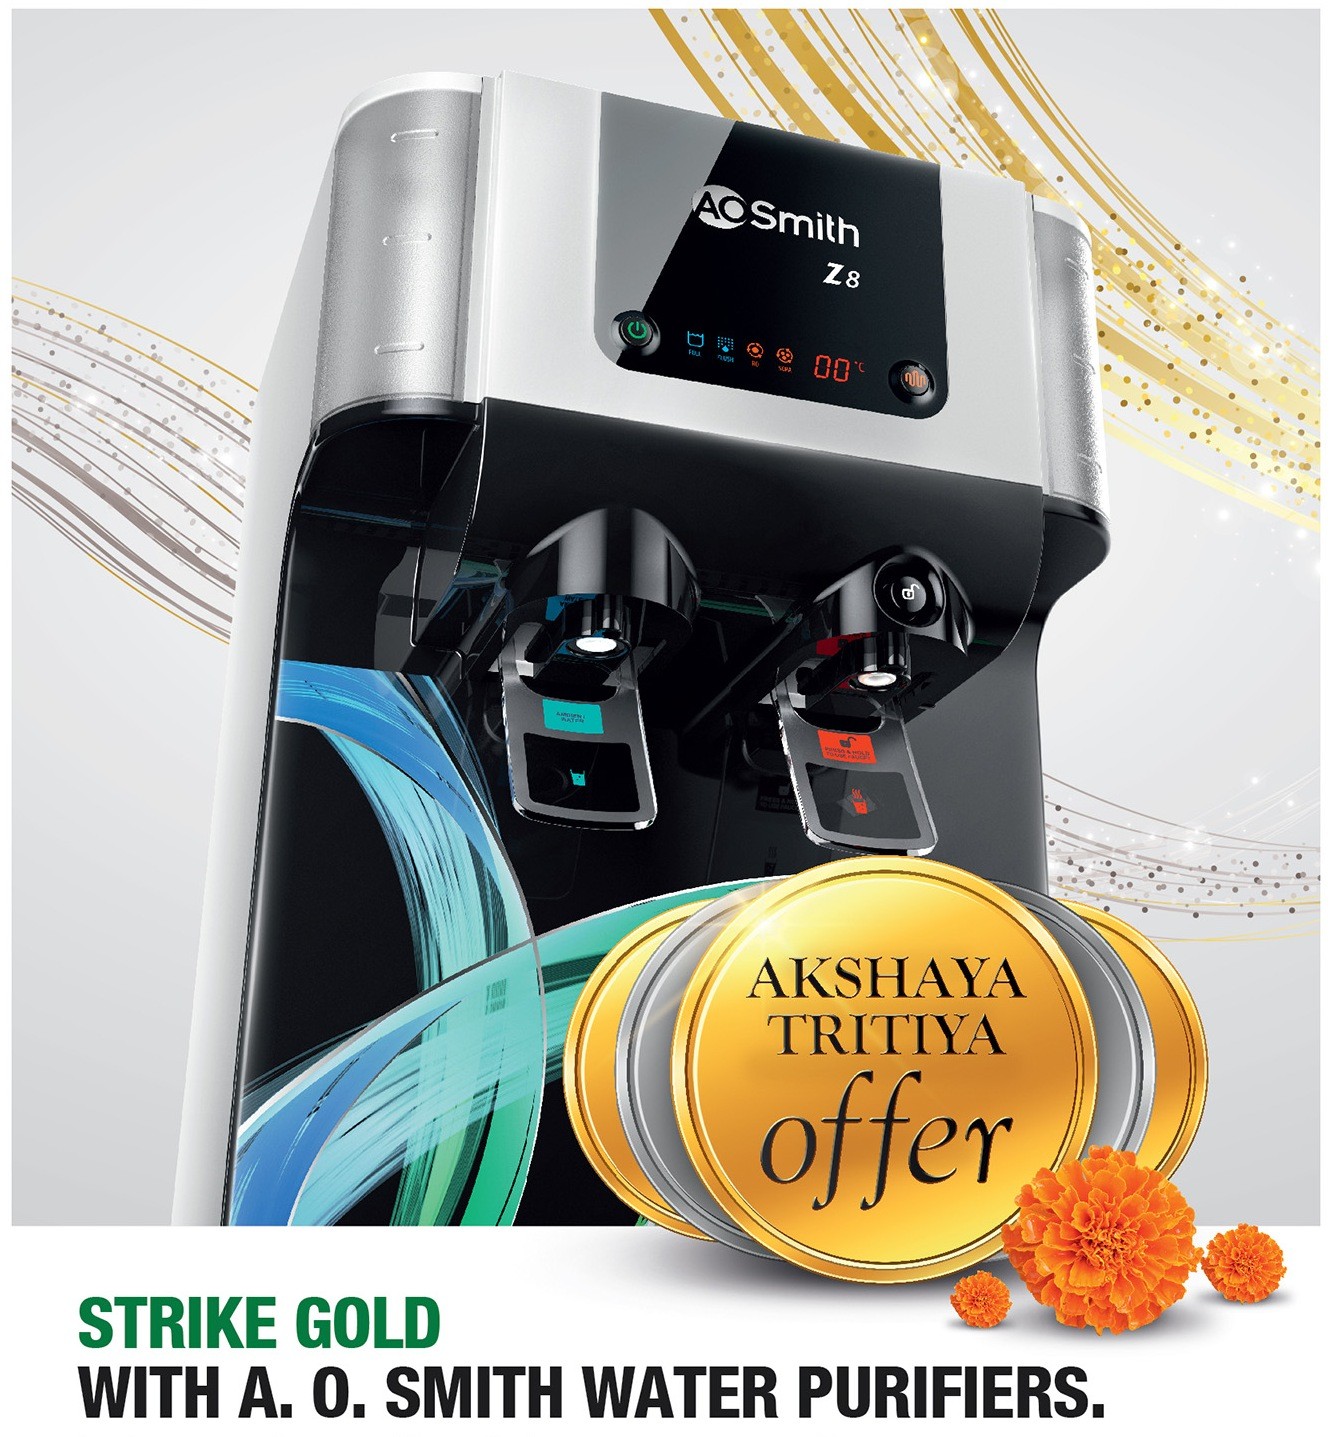 a-o-smith-announces-attractive-akshaya-tritiya-offer-on-water-purifiers